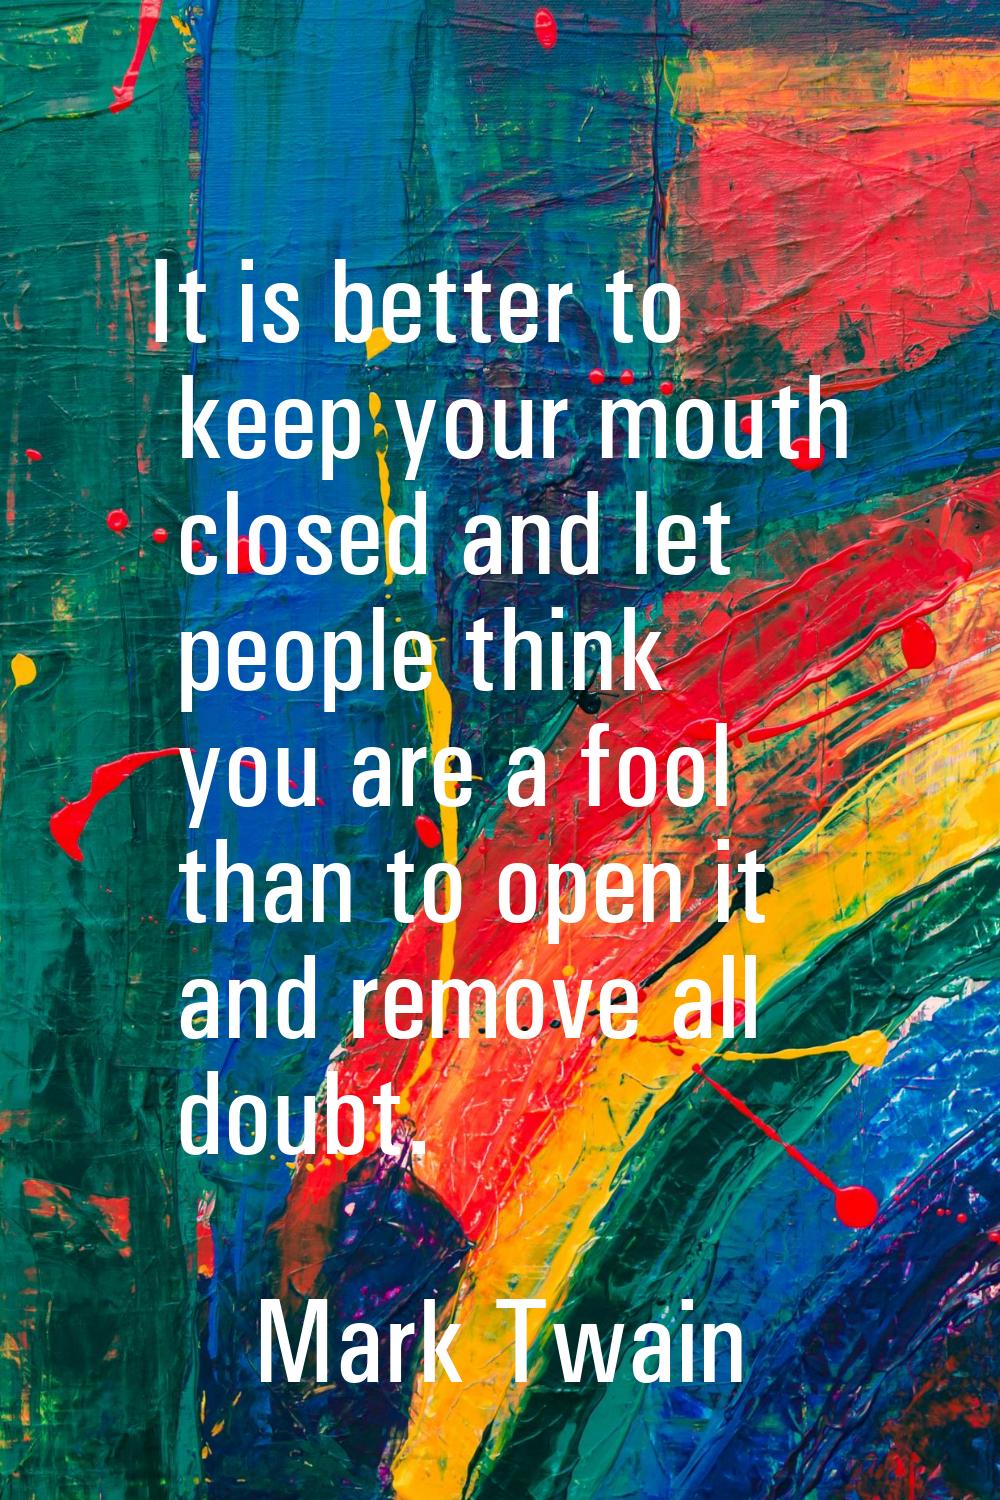 It is better to keep your mouth closed and let people think you are a fool than to open it and remo